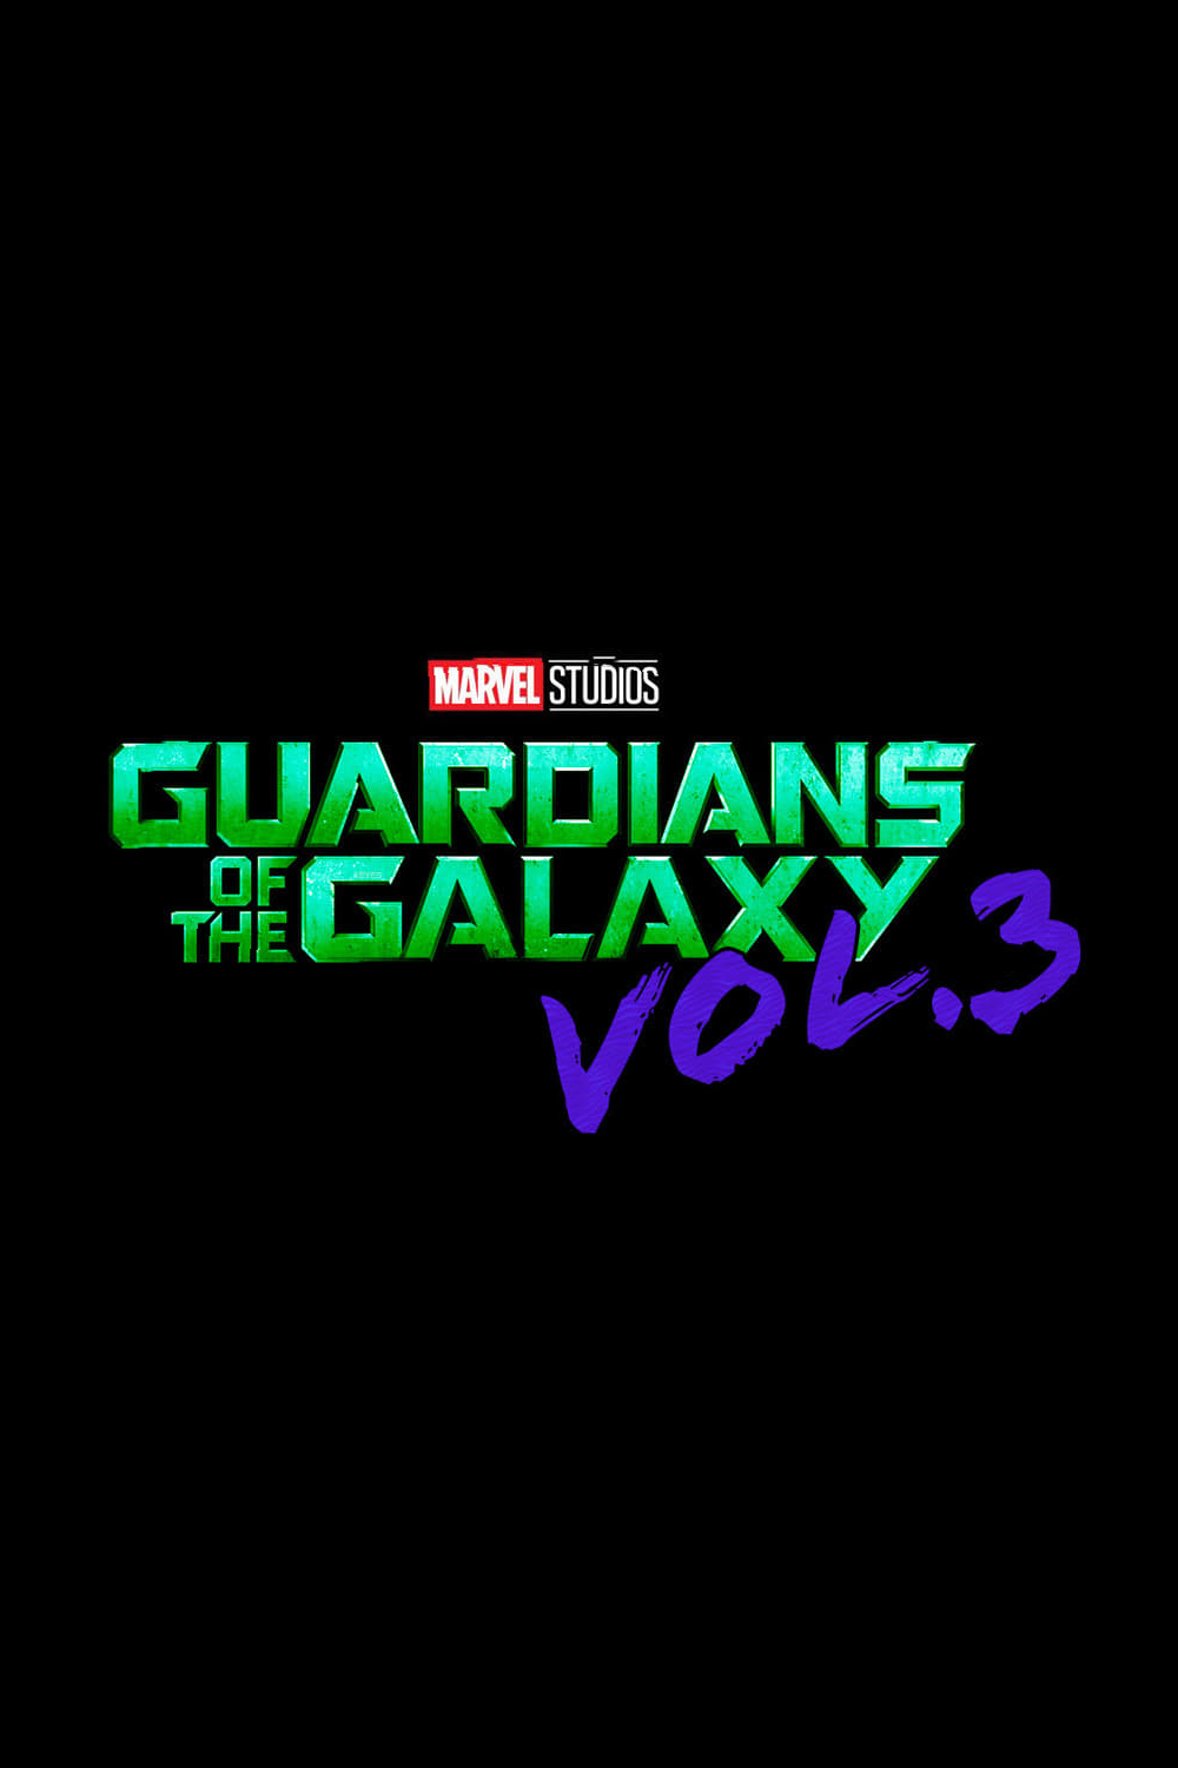 Marvel's 'Guardians of the Galaxy Vol. 3' Featured Extras